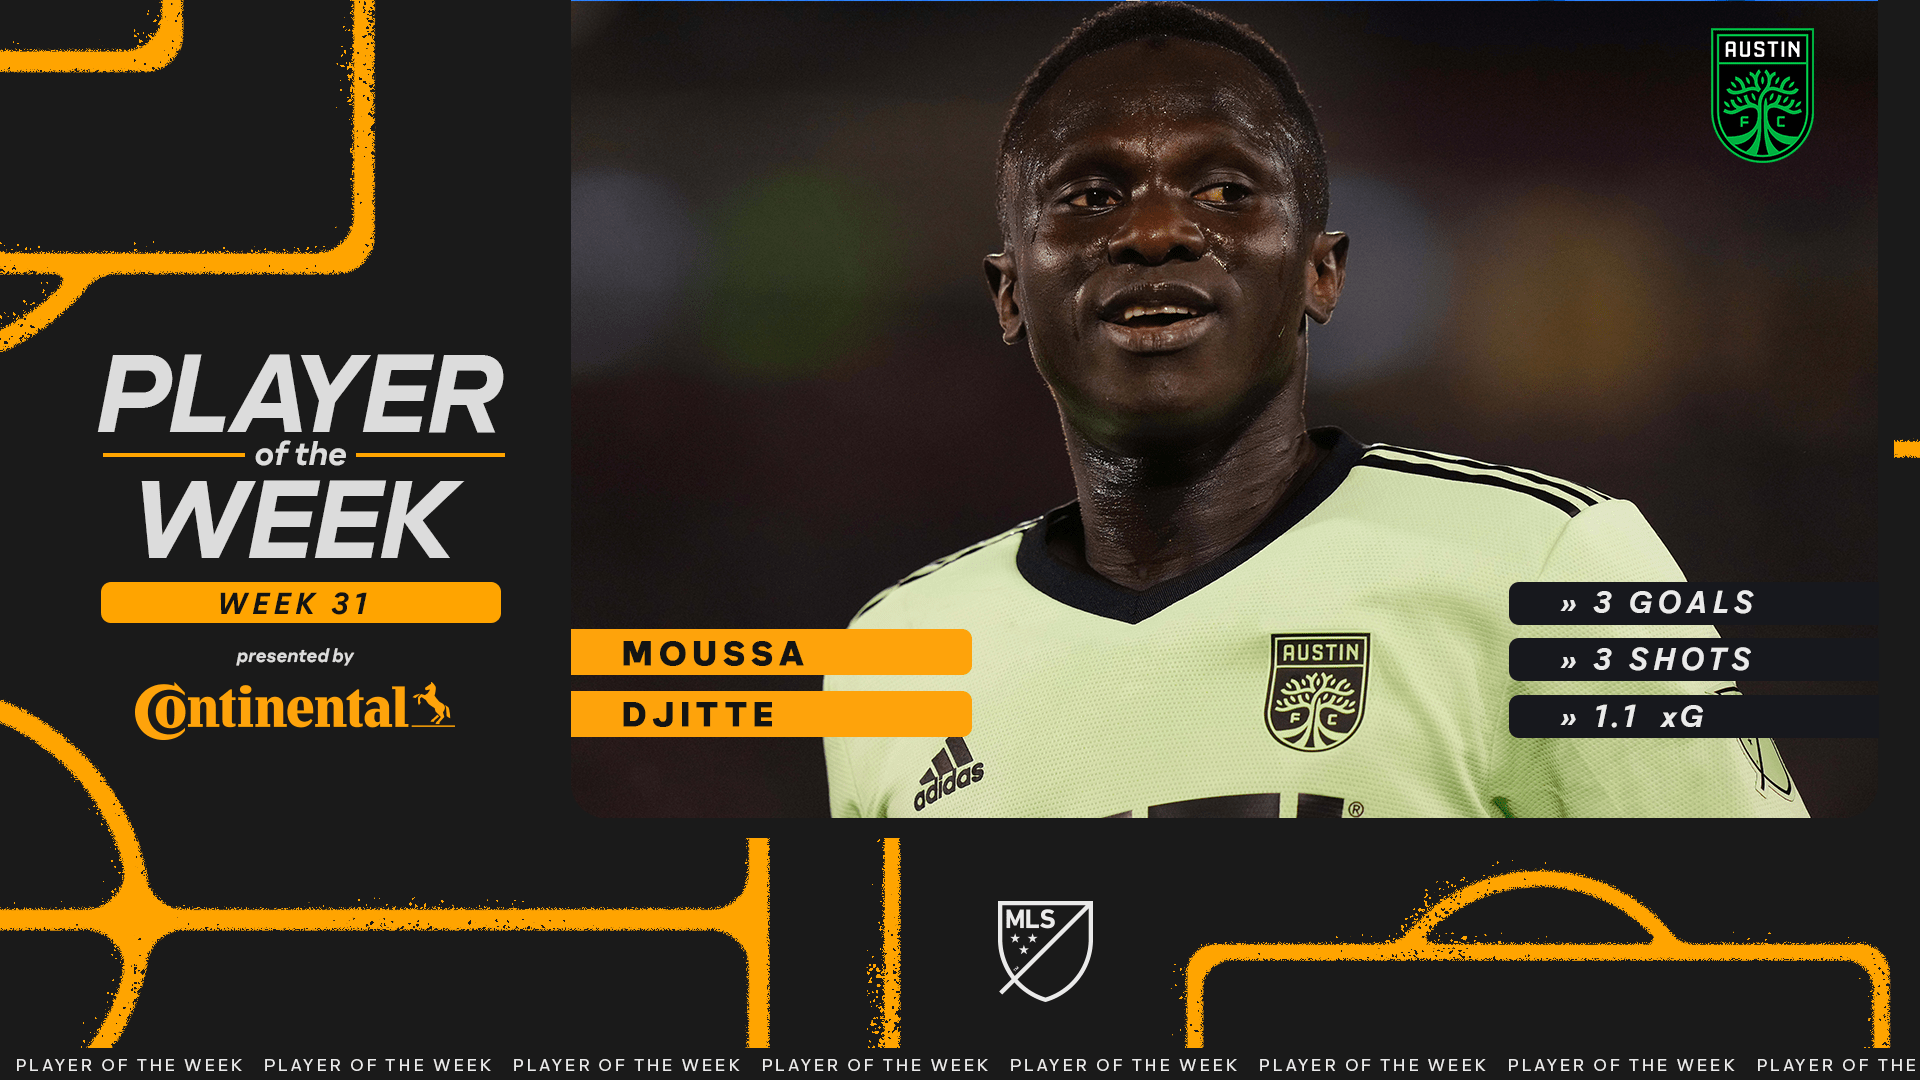 Austin FC Forward Moussa Djitté Voted MLS Player of the Week presented by Continental Tire for Week 31